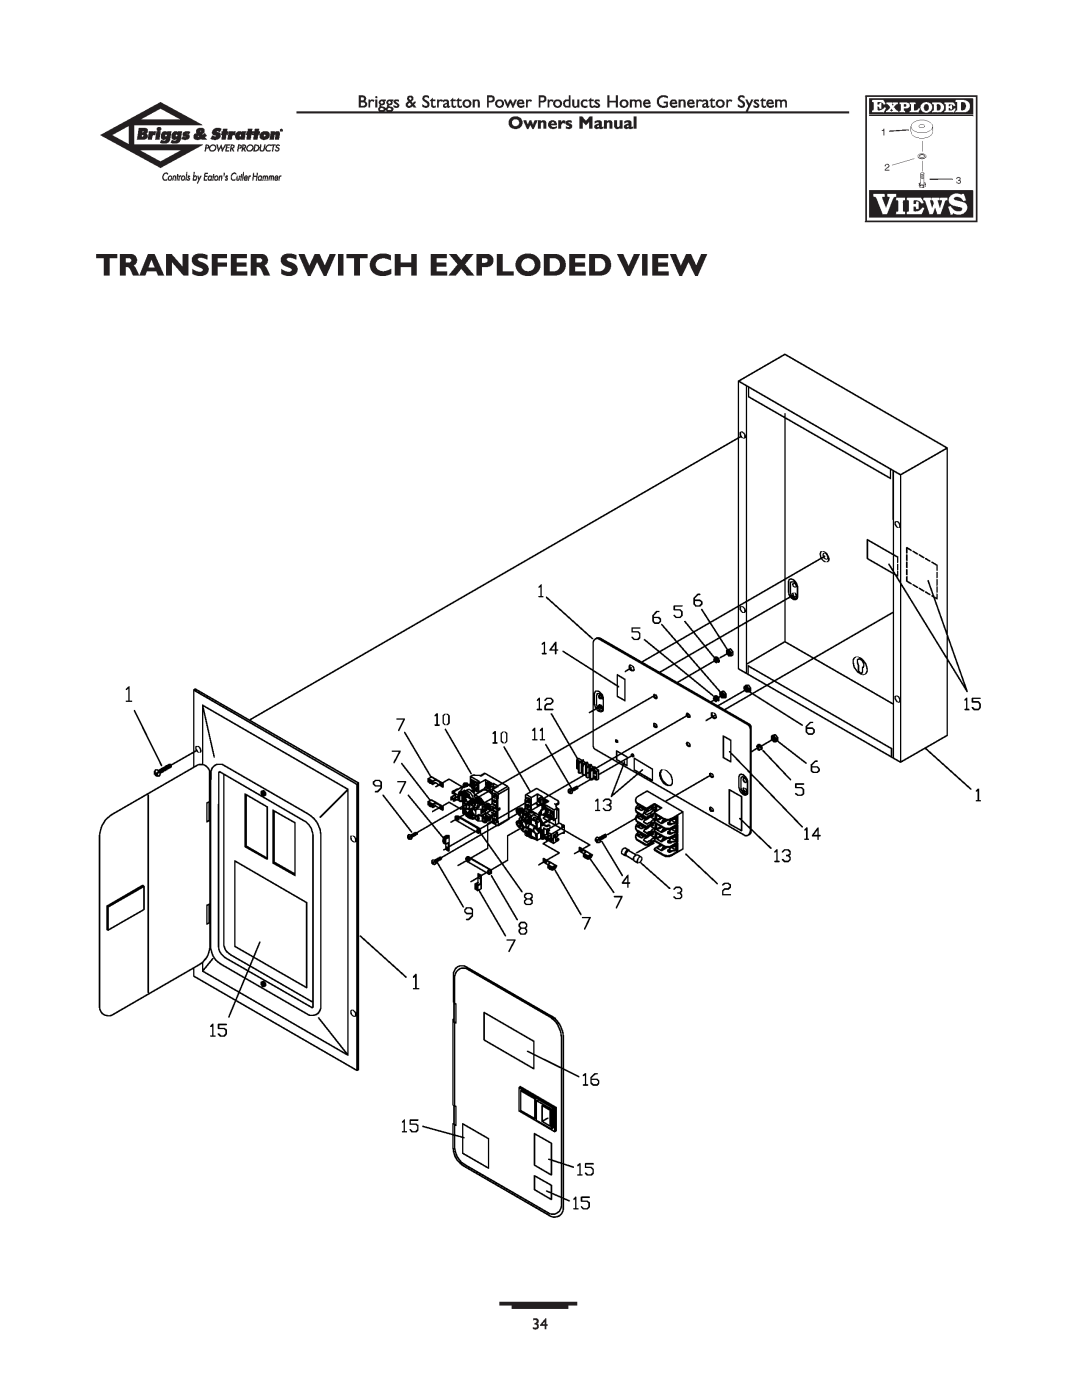 Briggs & Stratton 190839GS owner manual Transfer Switch Exploded View, Owners Manual 